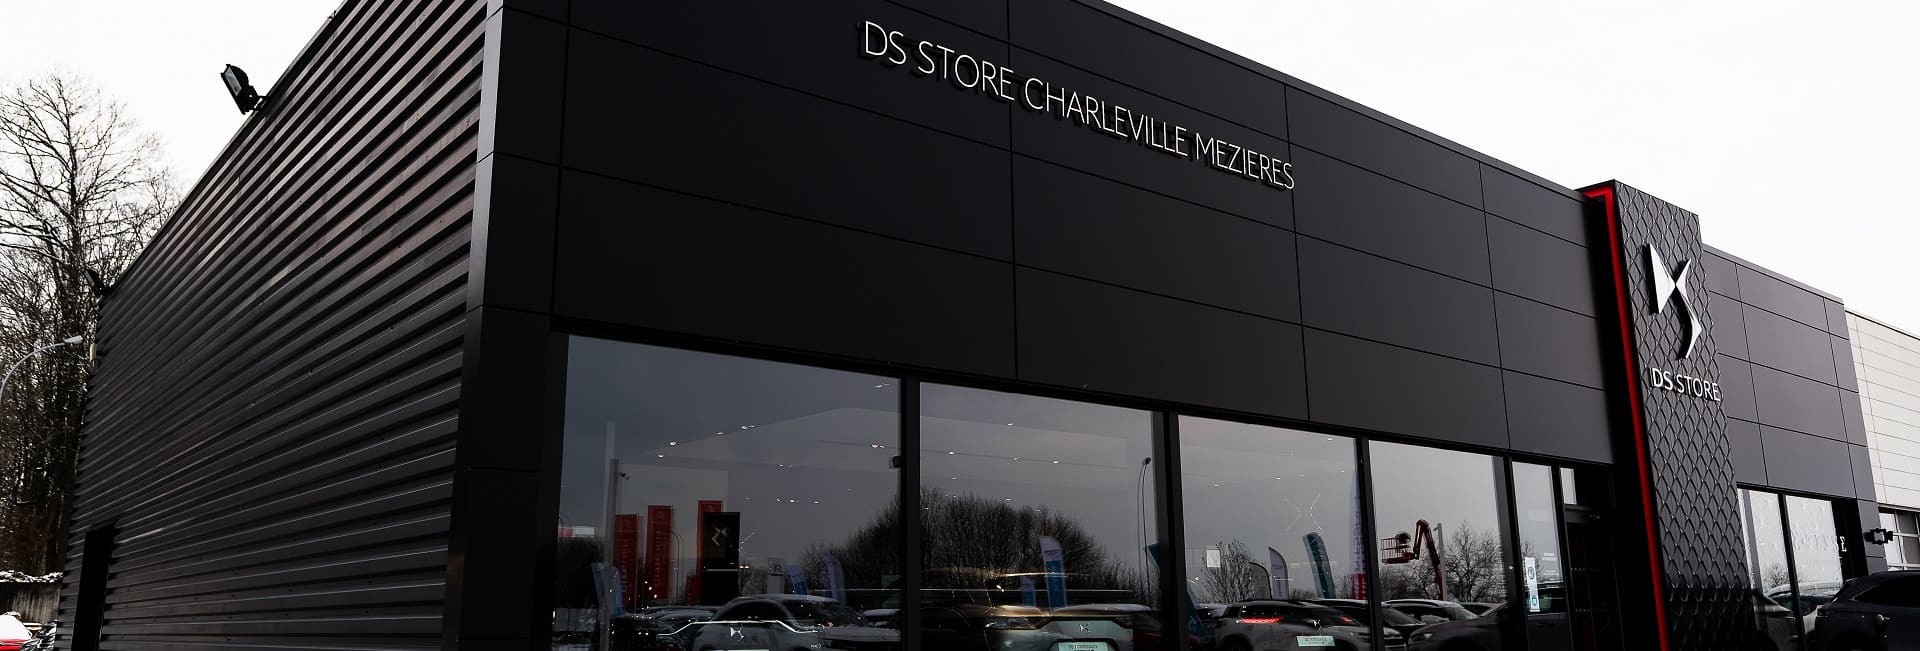 DS STORE CHARLEVILLE